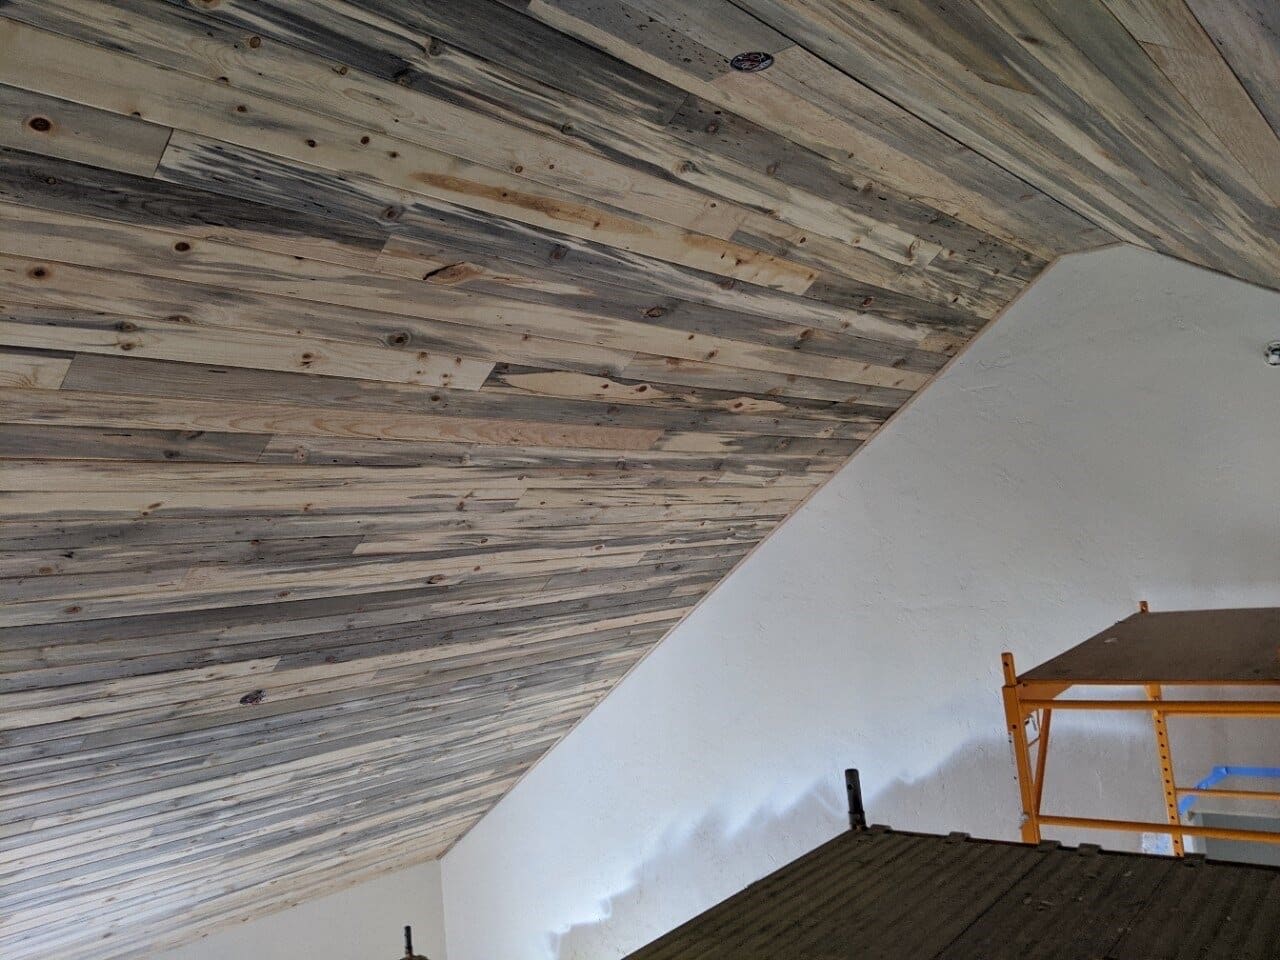 Close-up of a vaulted wooden ceiling